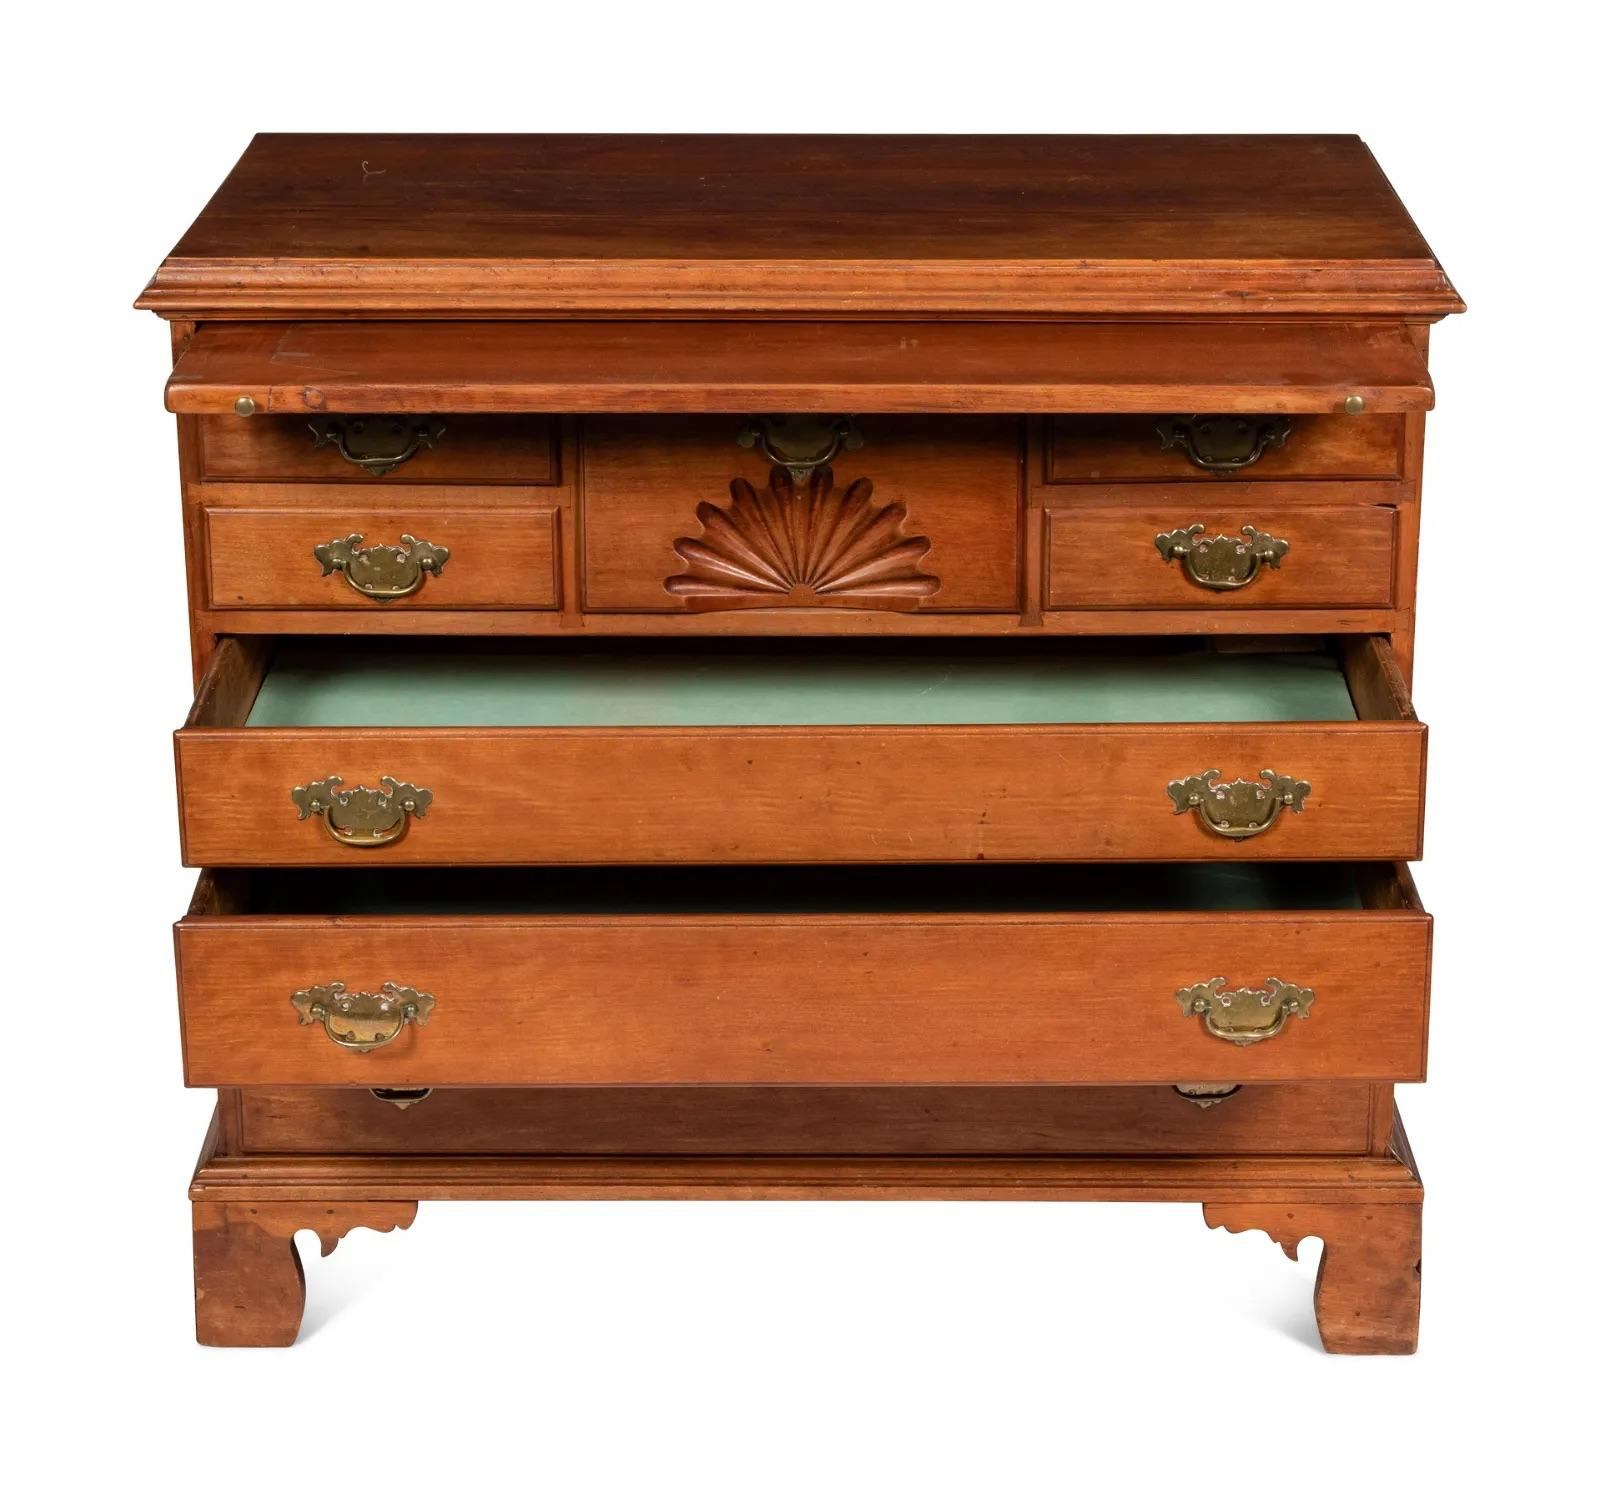 19th Century Antique Chippendale Fan-Carved Walnut Bachelor's Chest of Drawers